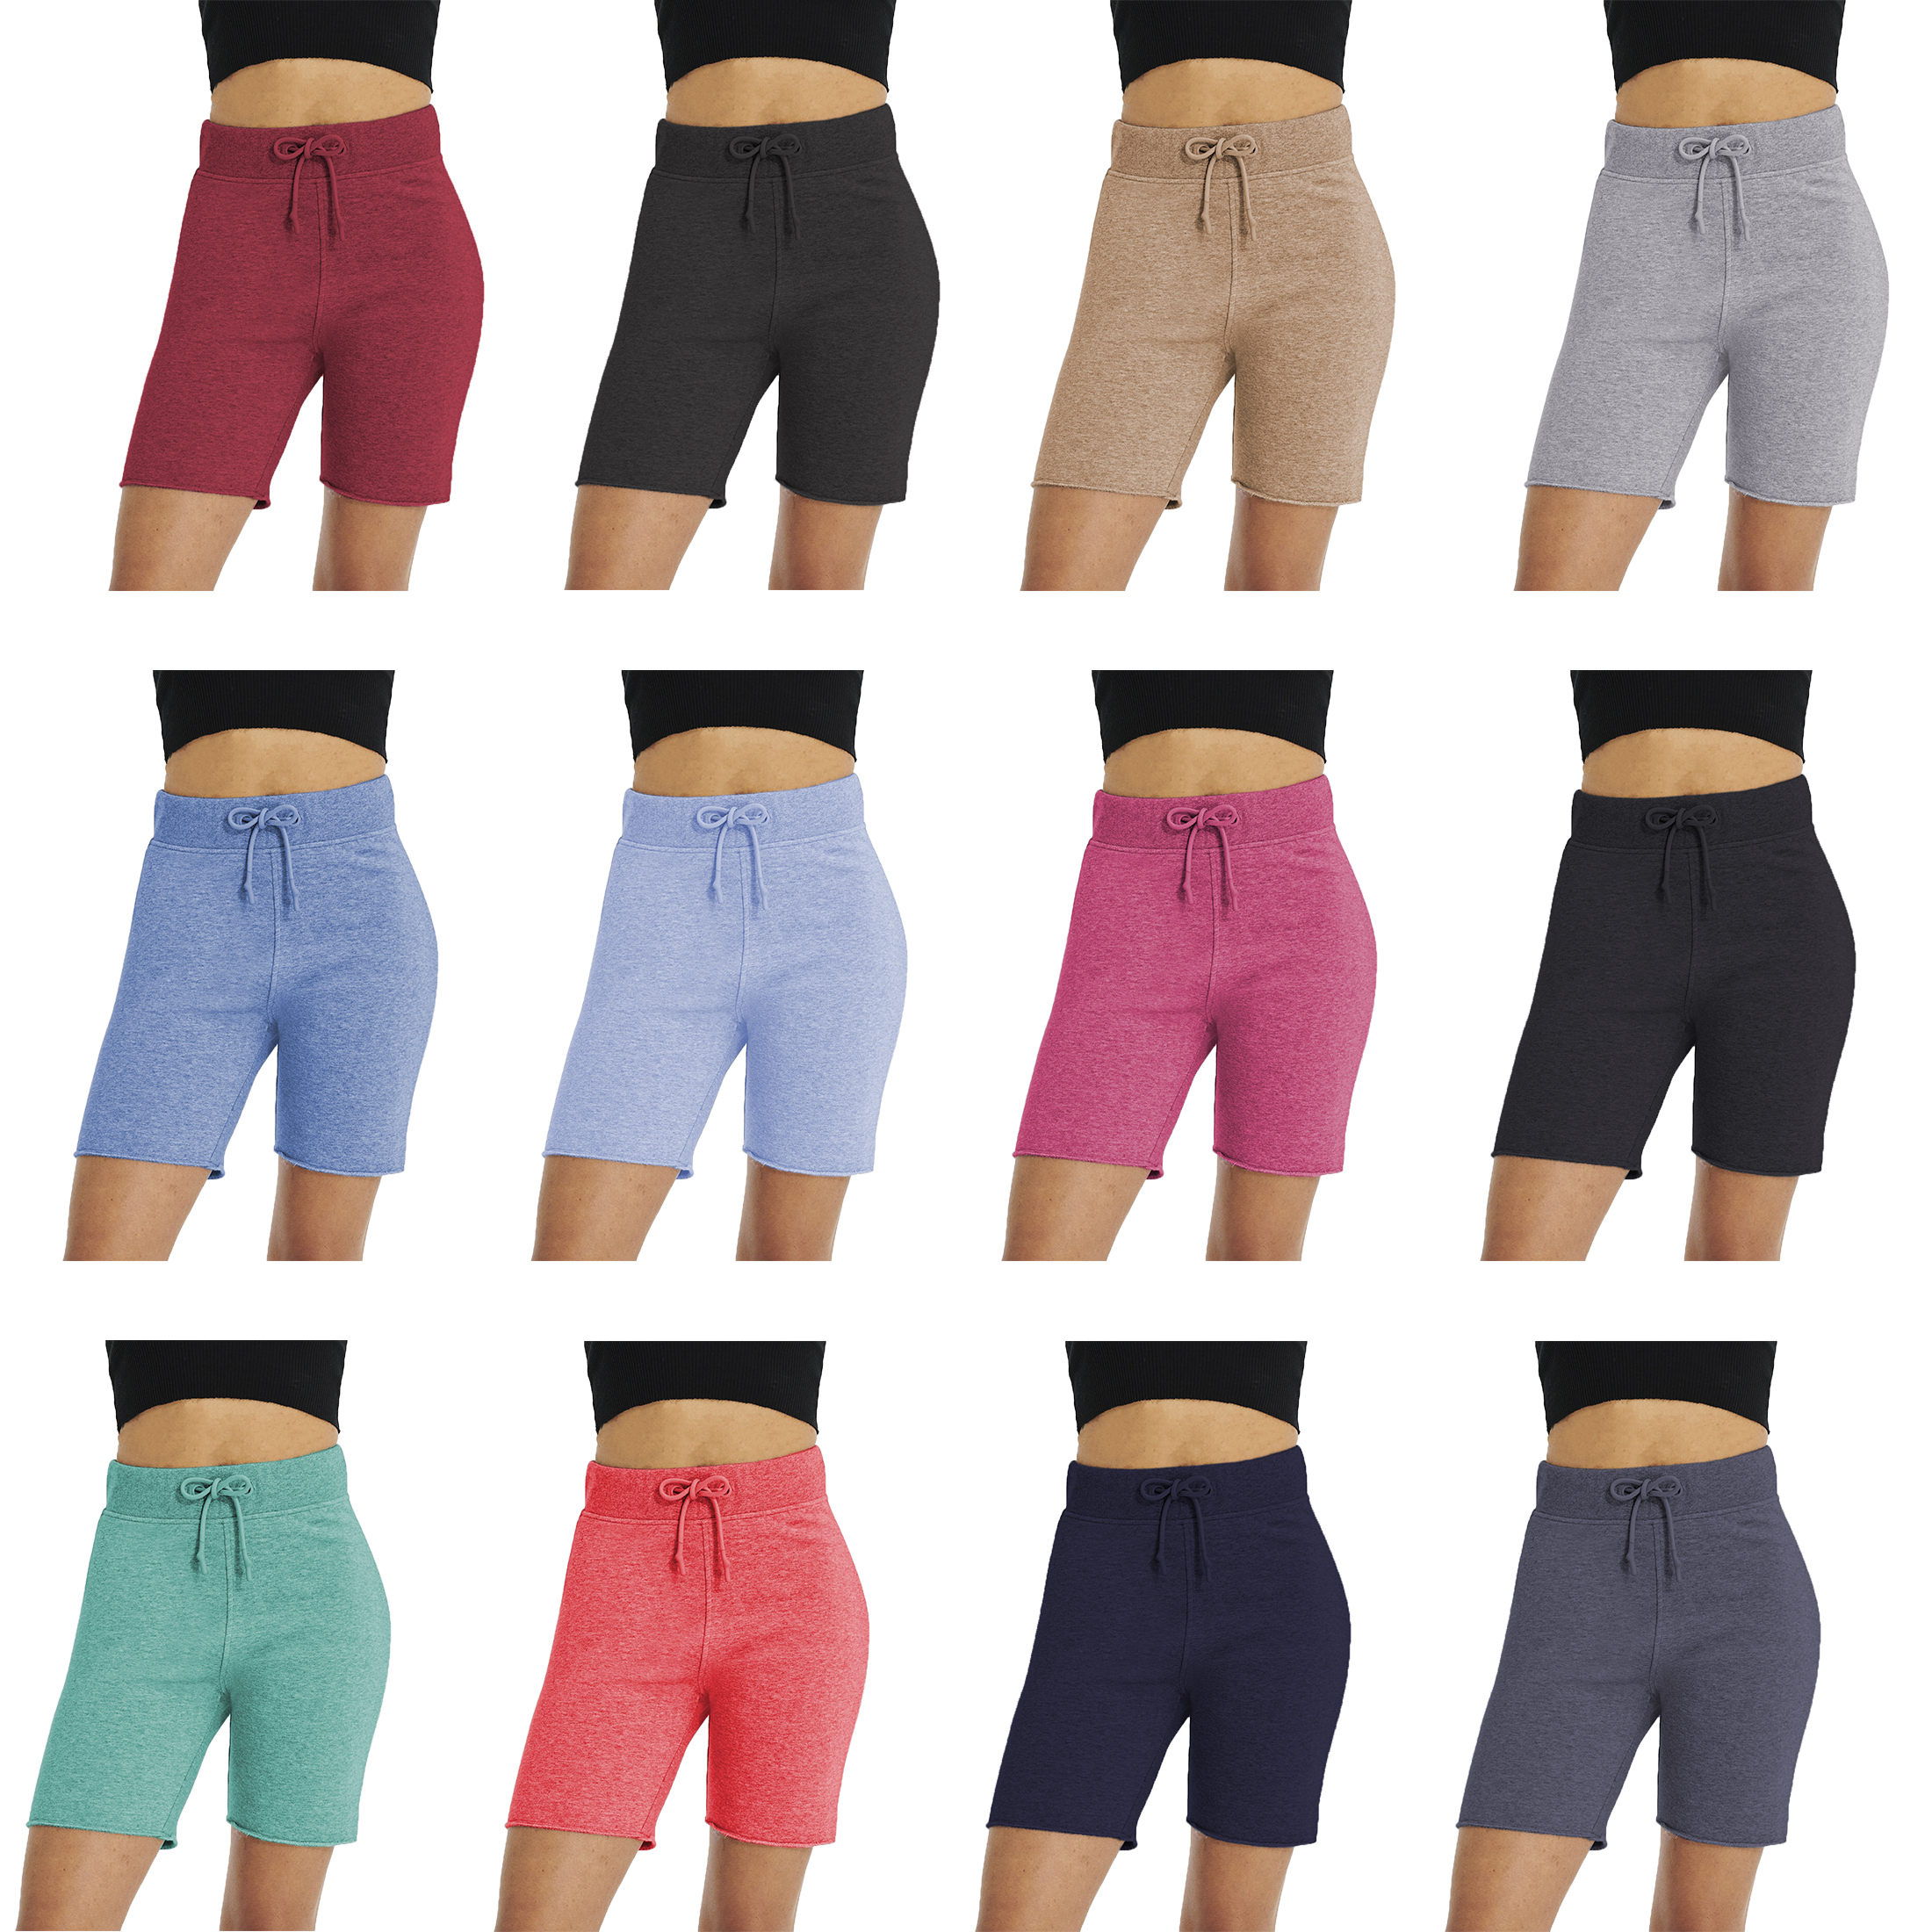 4-Pack Women’s Solid Summer Bermuda Shorts Soft Slim-Fit Stretchy Active Athletic Skinny Ladies Pants - XL